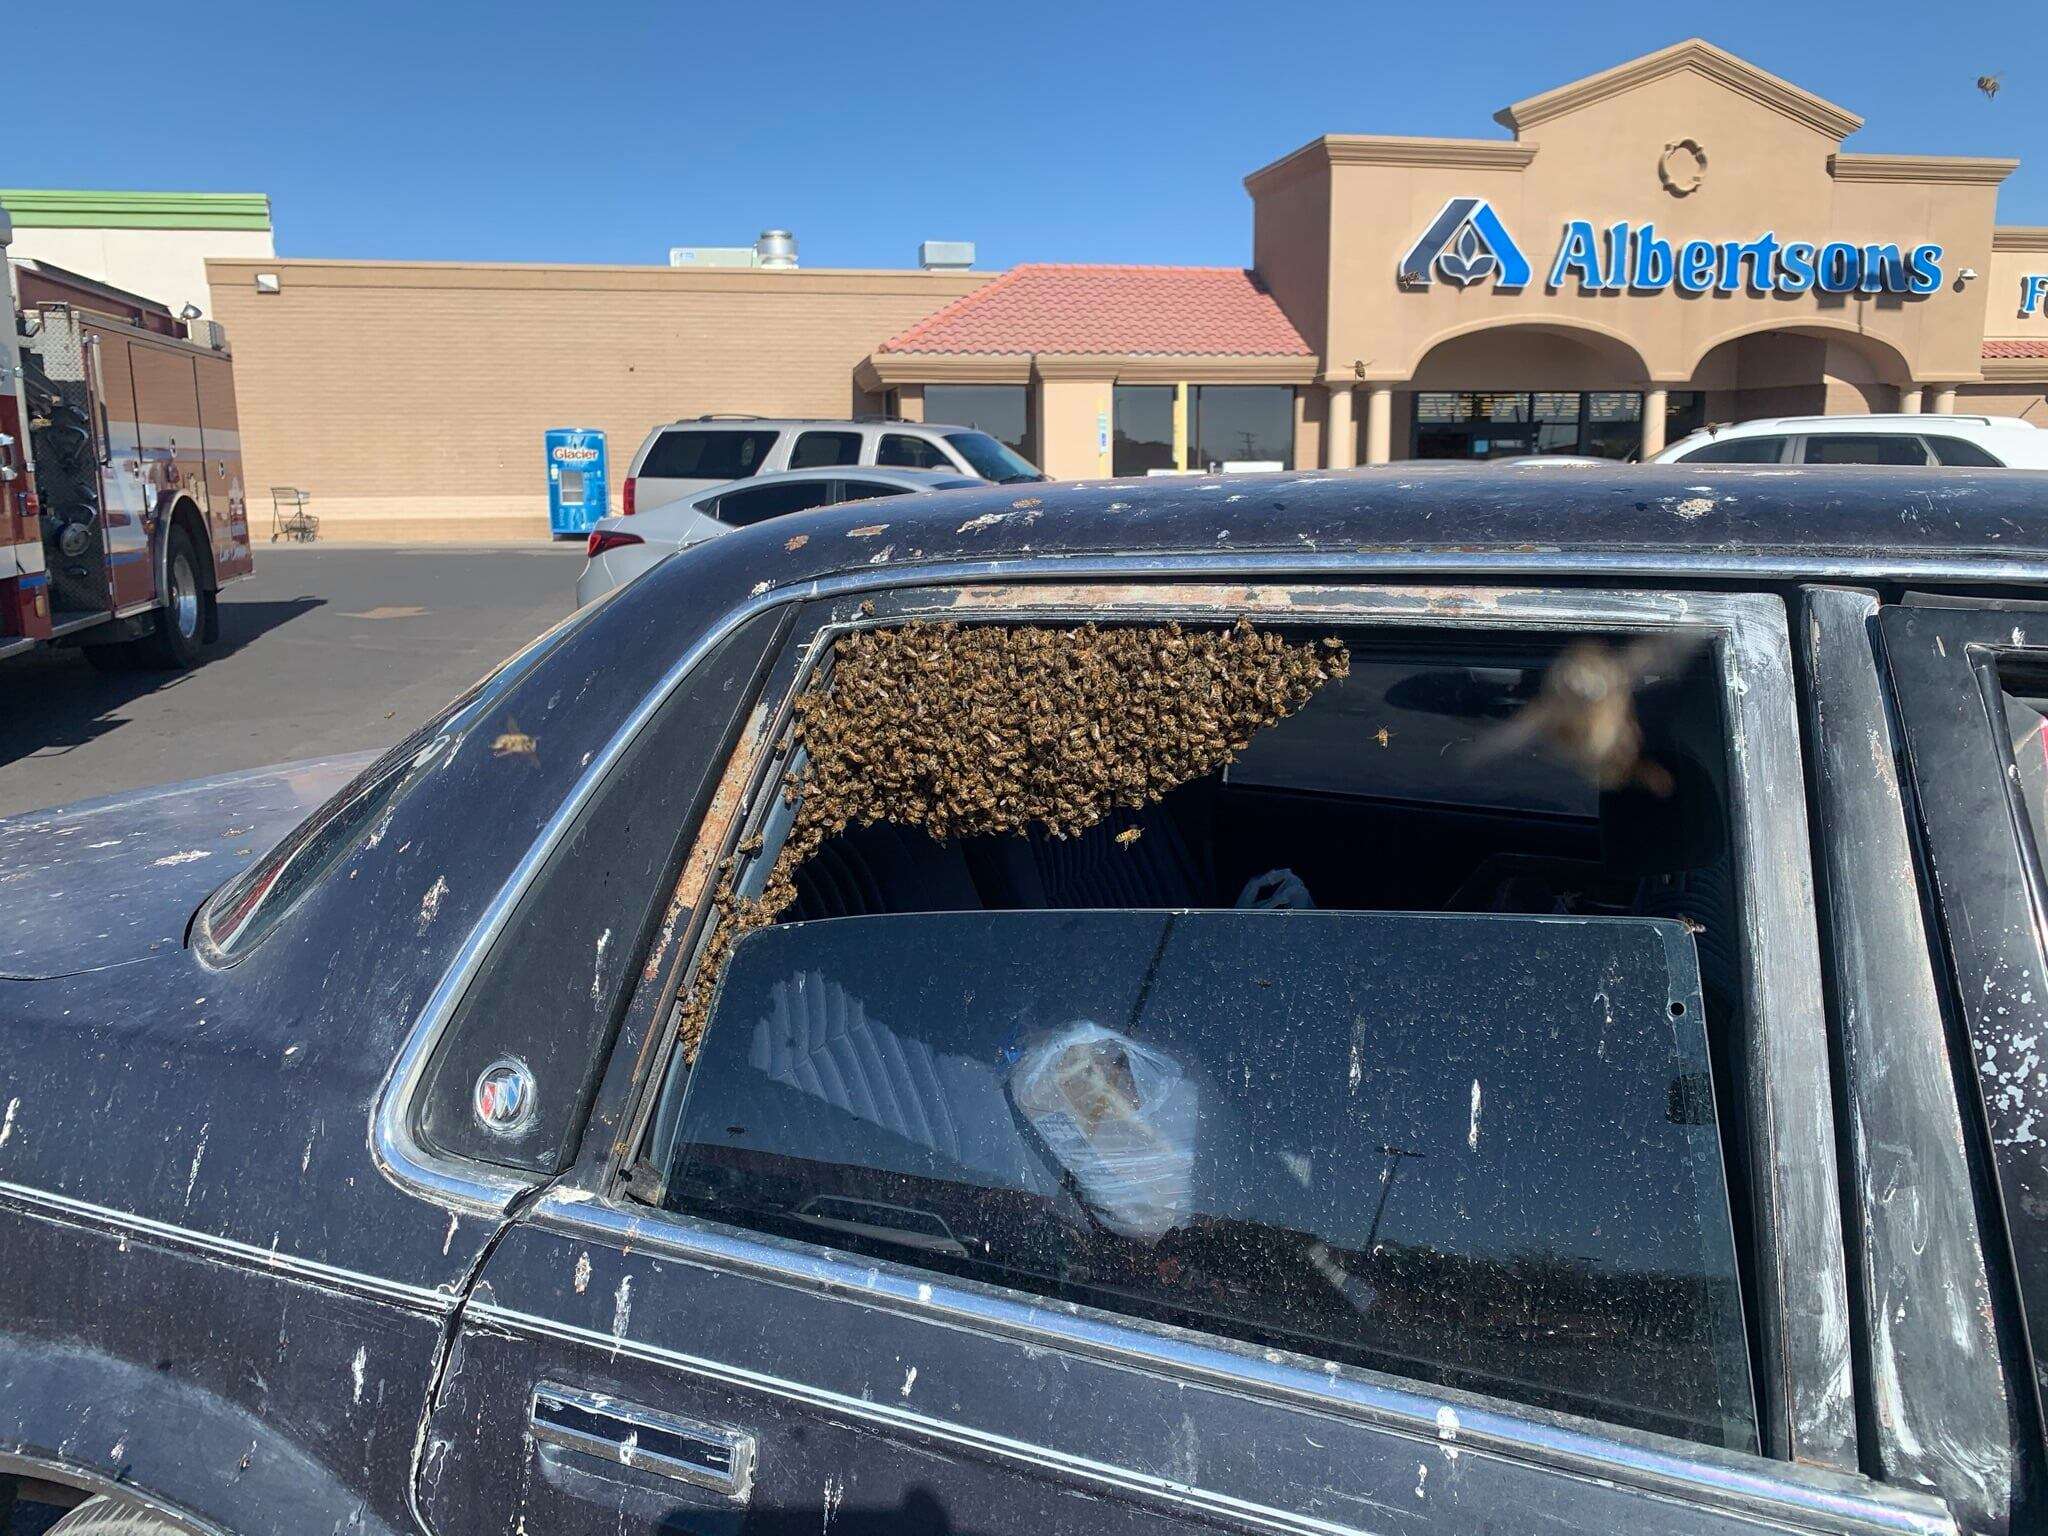 Swarm of 15,000 bees take over car